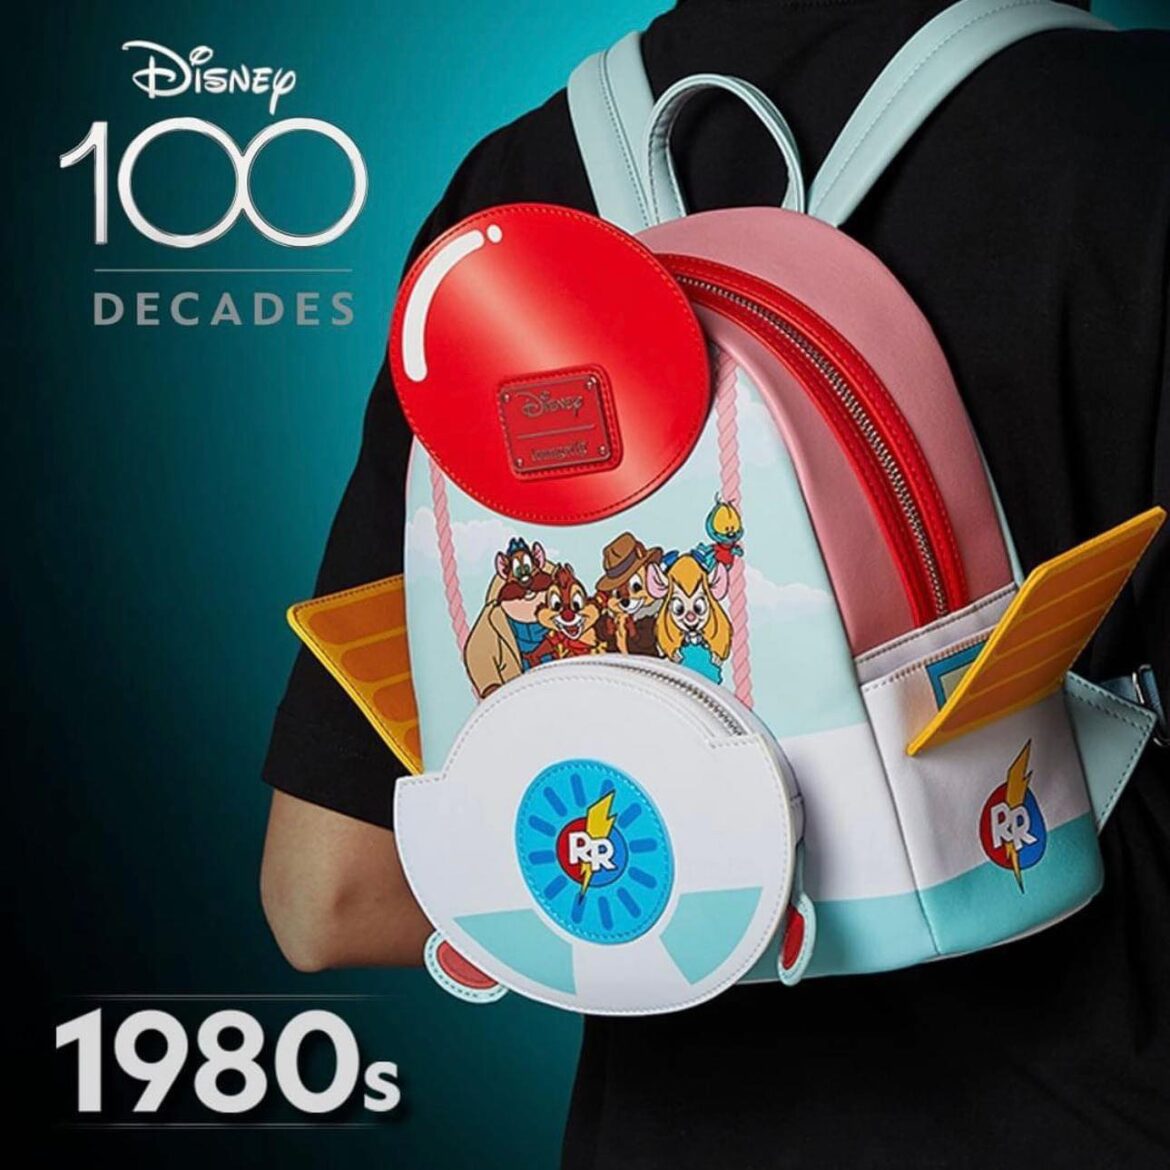 New Disney100 Decades 1980s Collection Coming Soon To shopDisney!